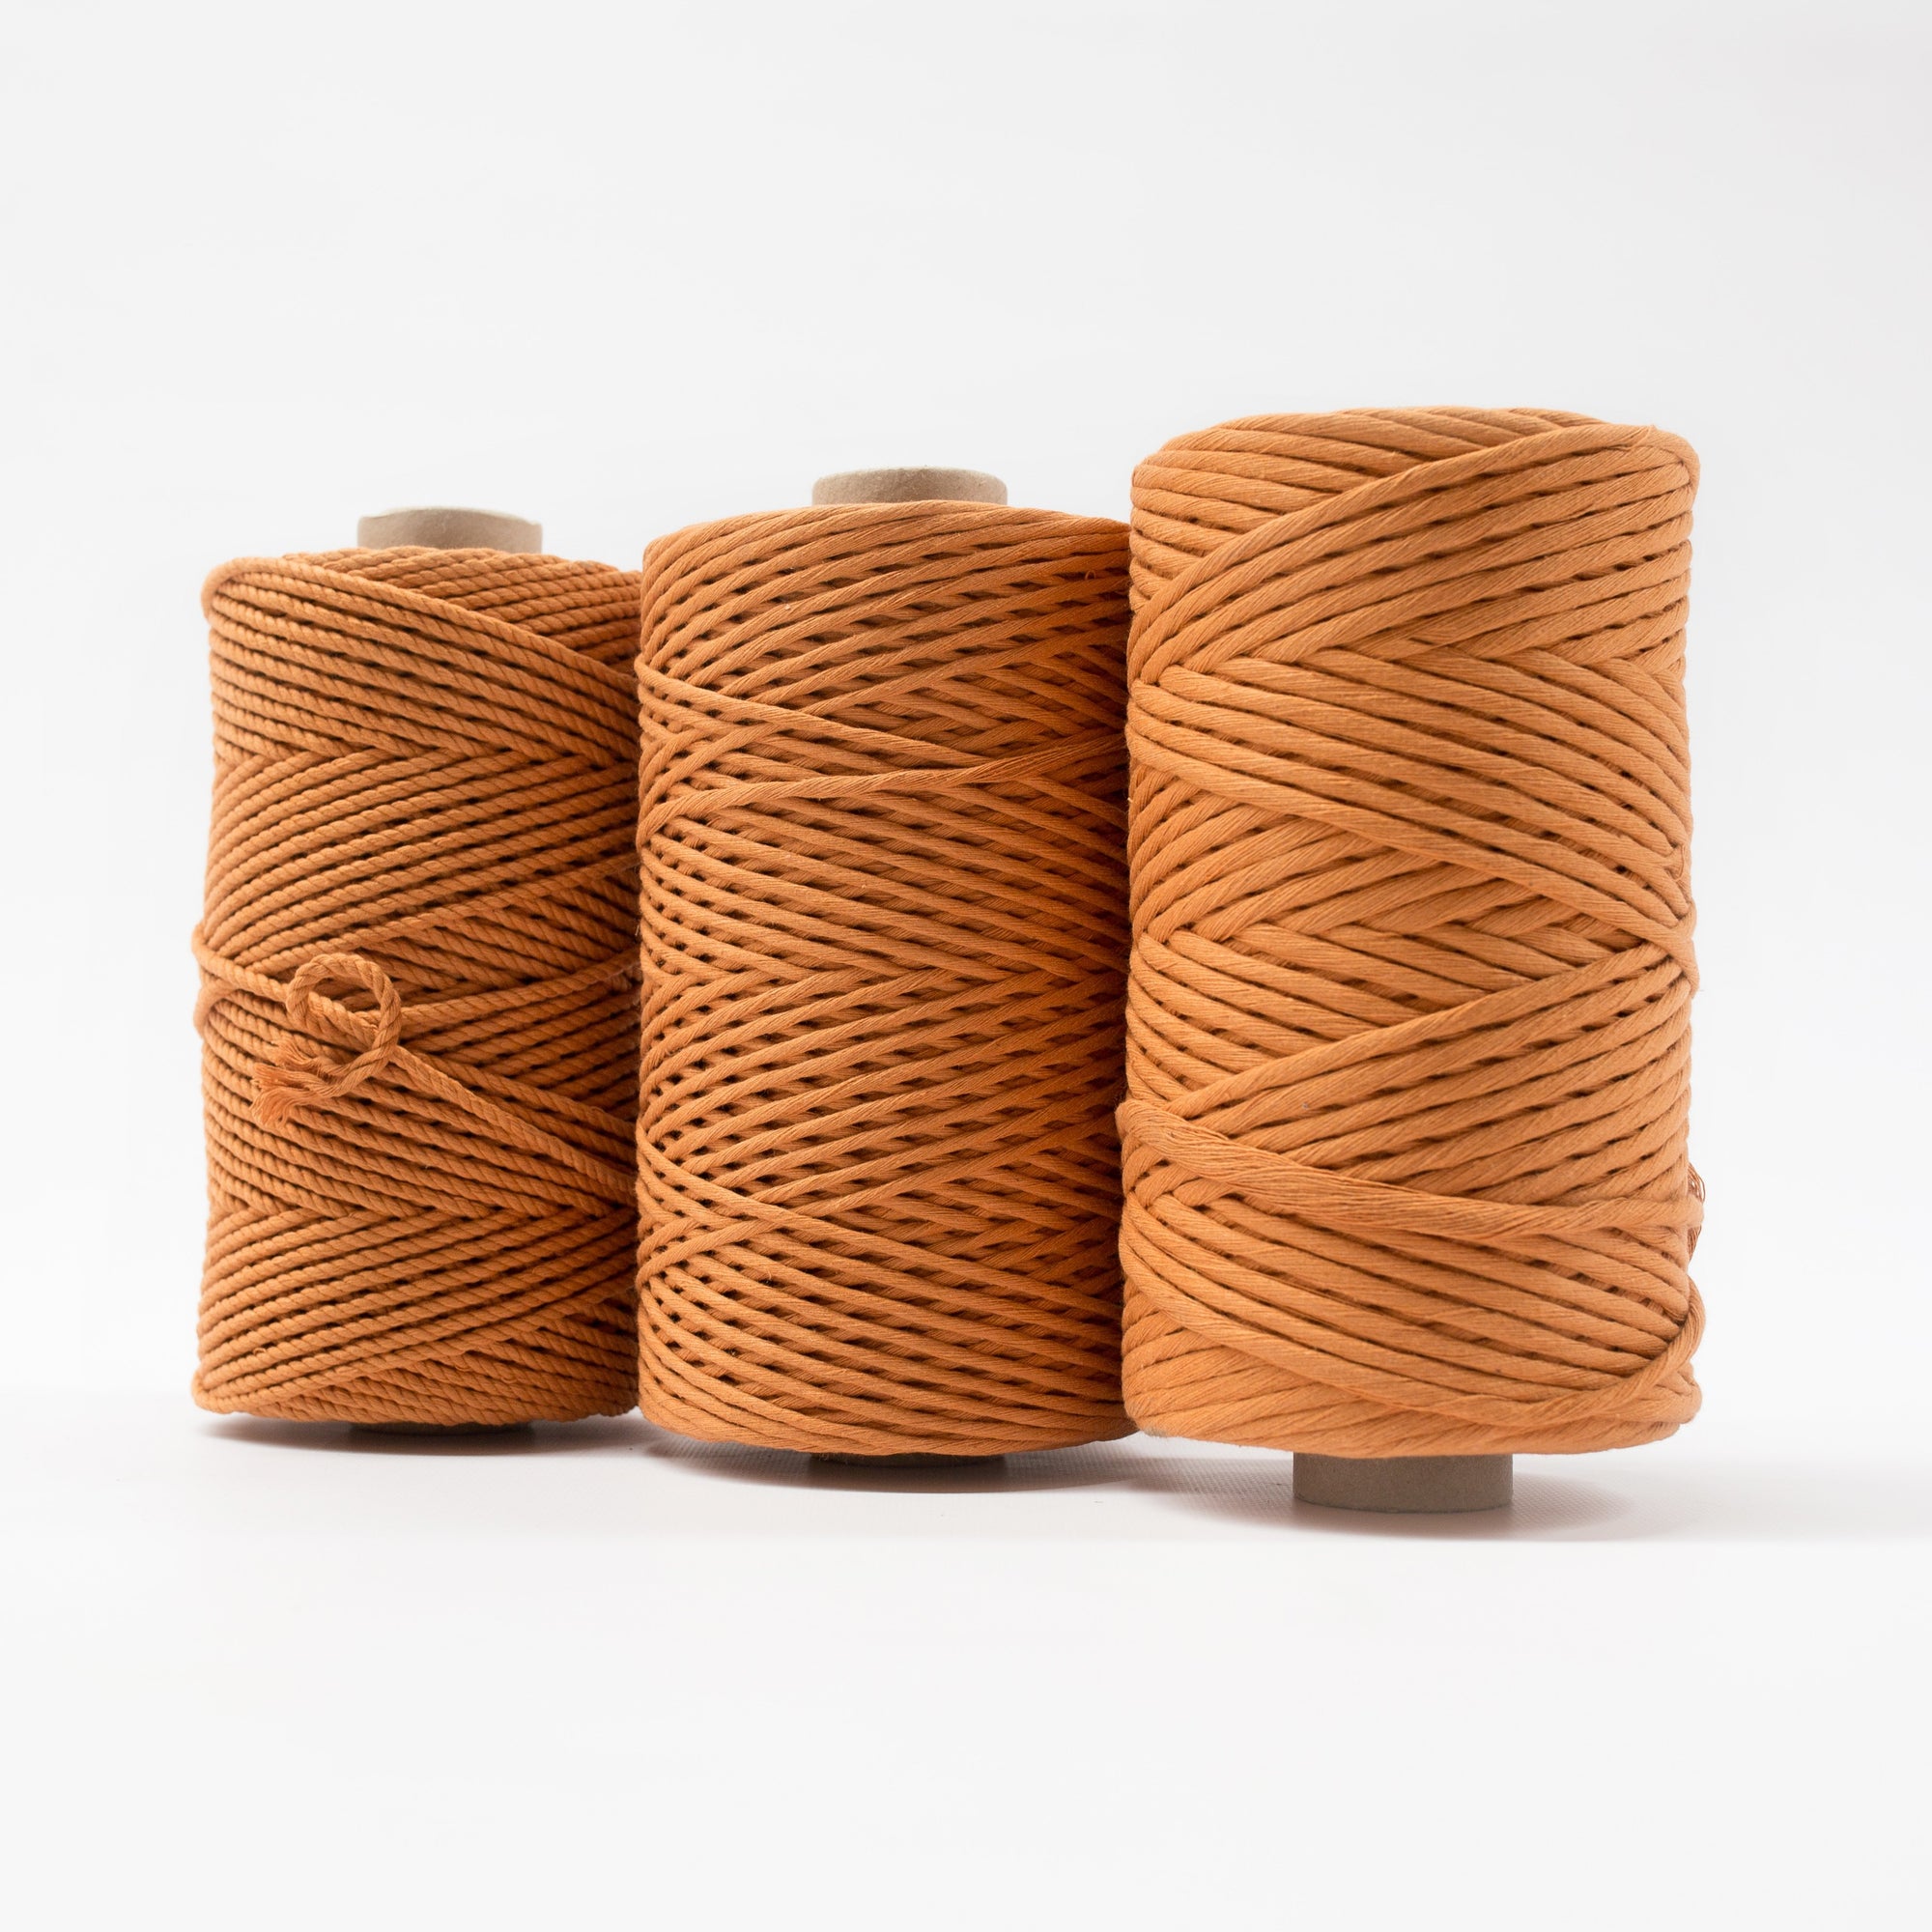 Mary Maker Studio Luxe Colour Cotton Recycled Luxe Macrame String // Caramel macrame cotton macrame rope macrame workshop macrame patterns macrame